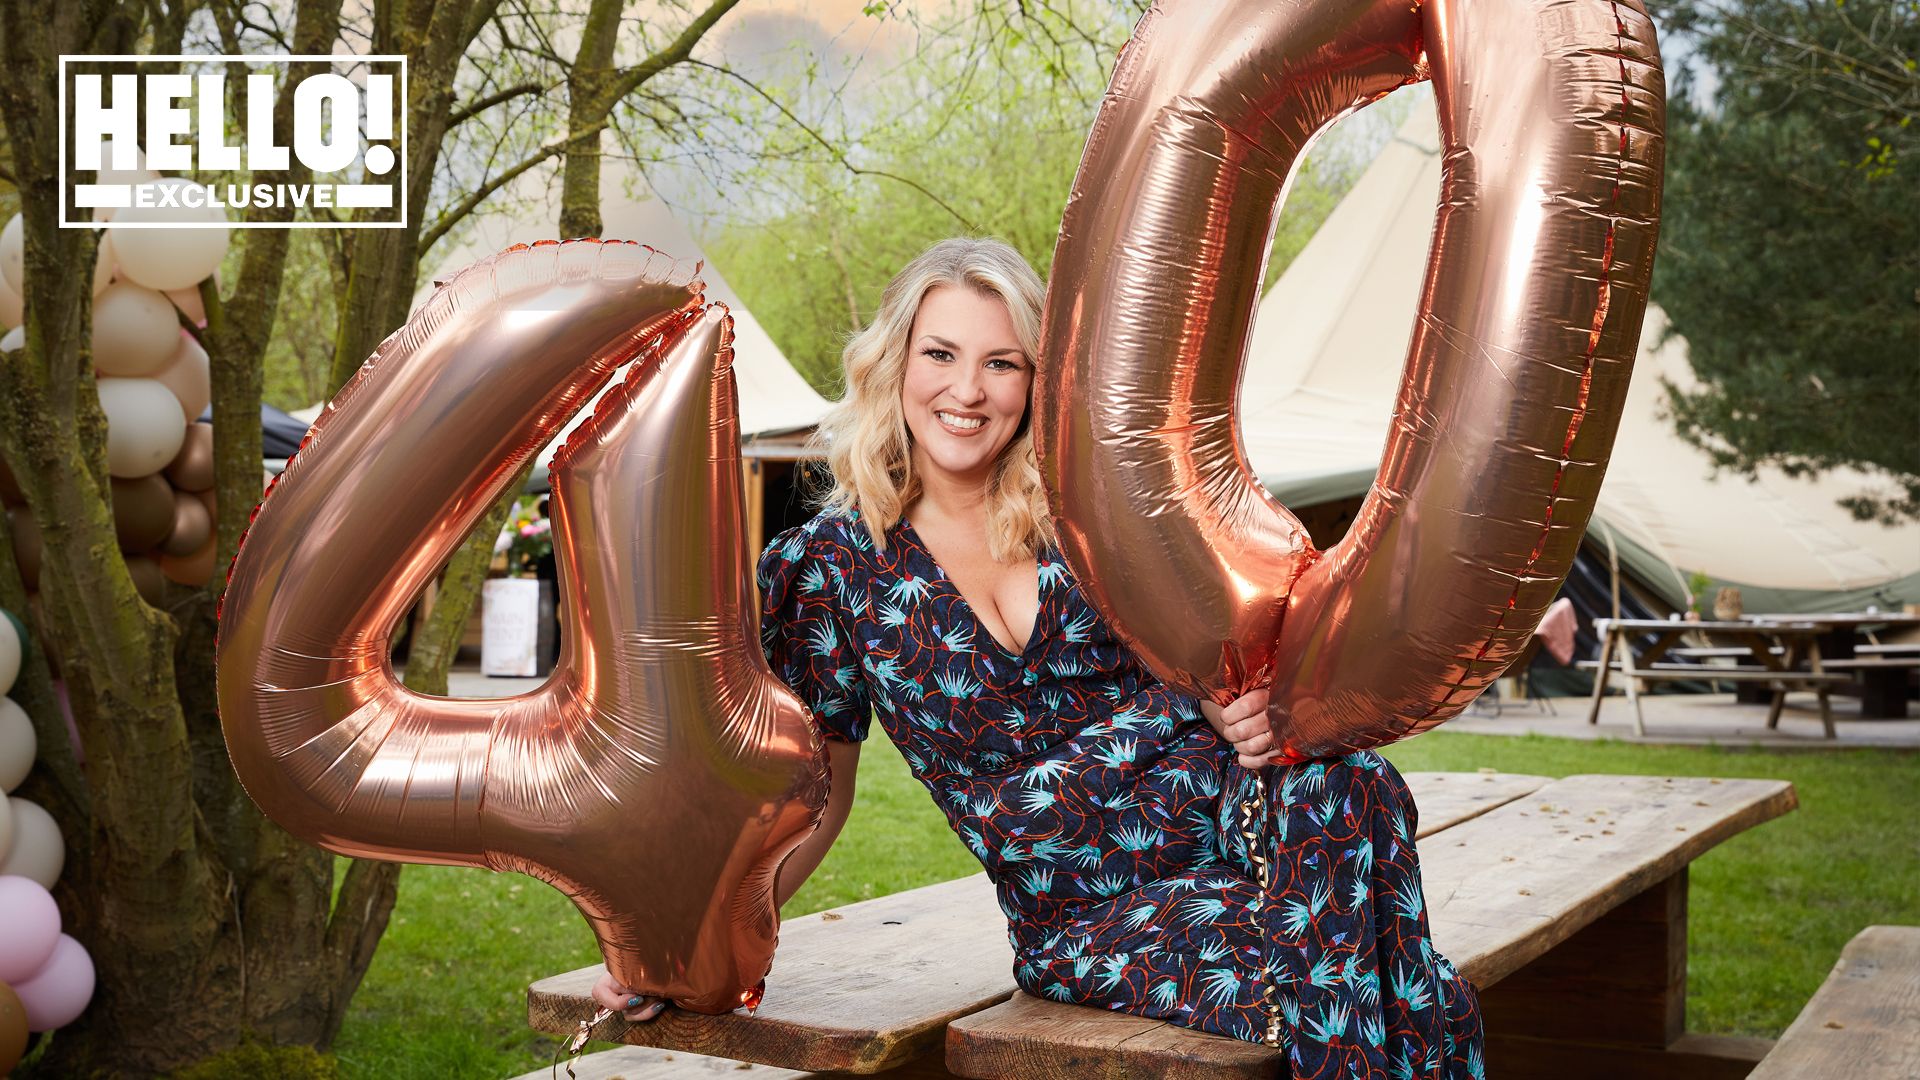 Inside Sara Davies' epic 40th birthday party: Strictly guests, gigantic cake, bumper cars and more